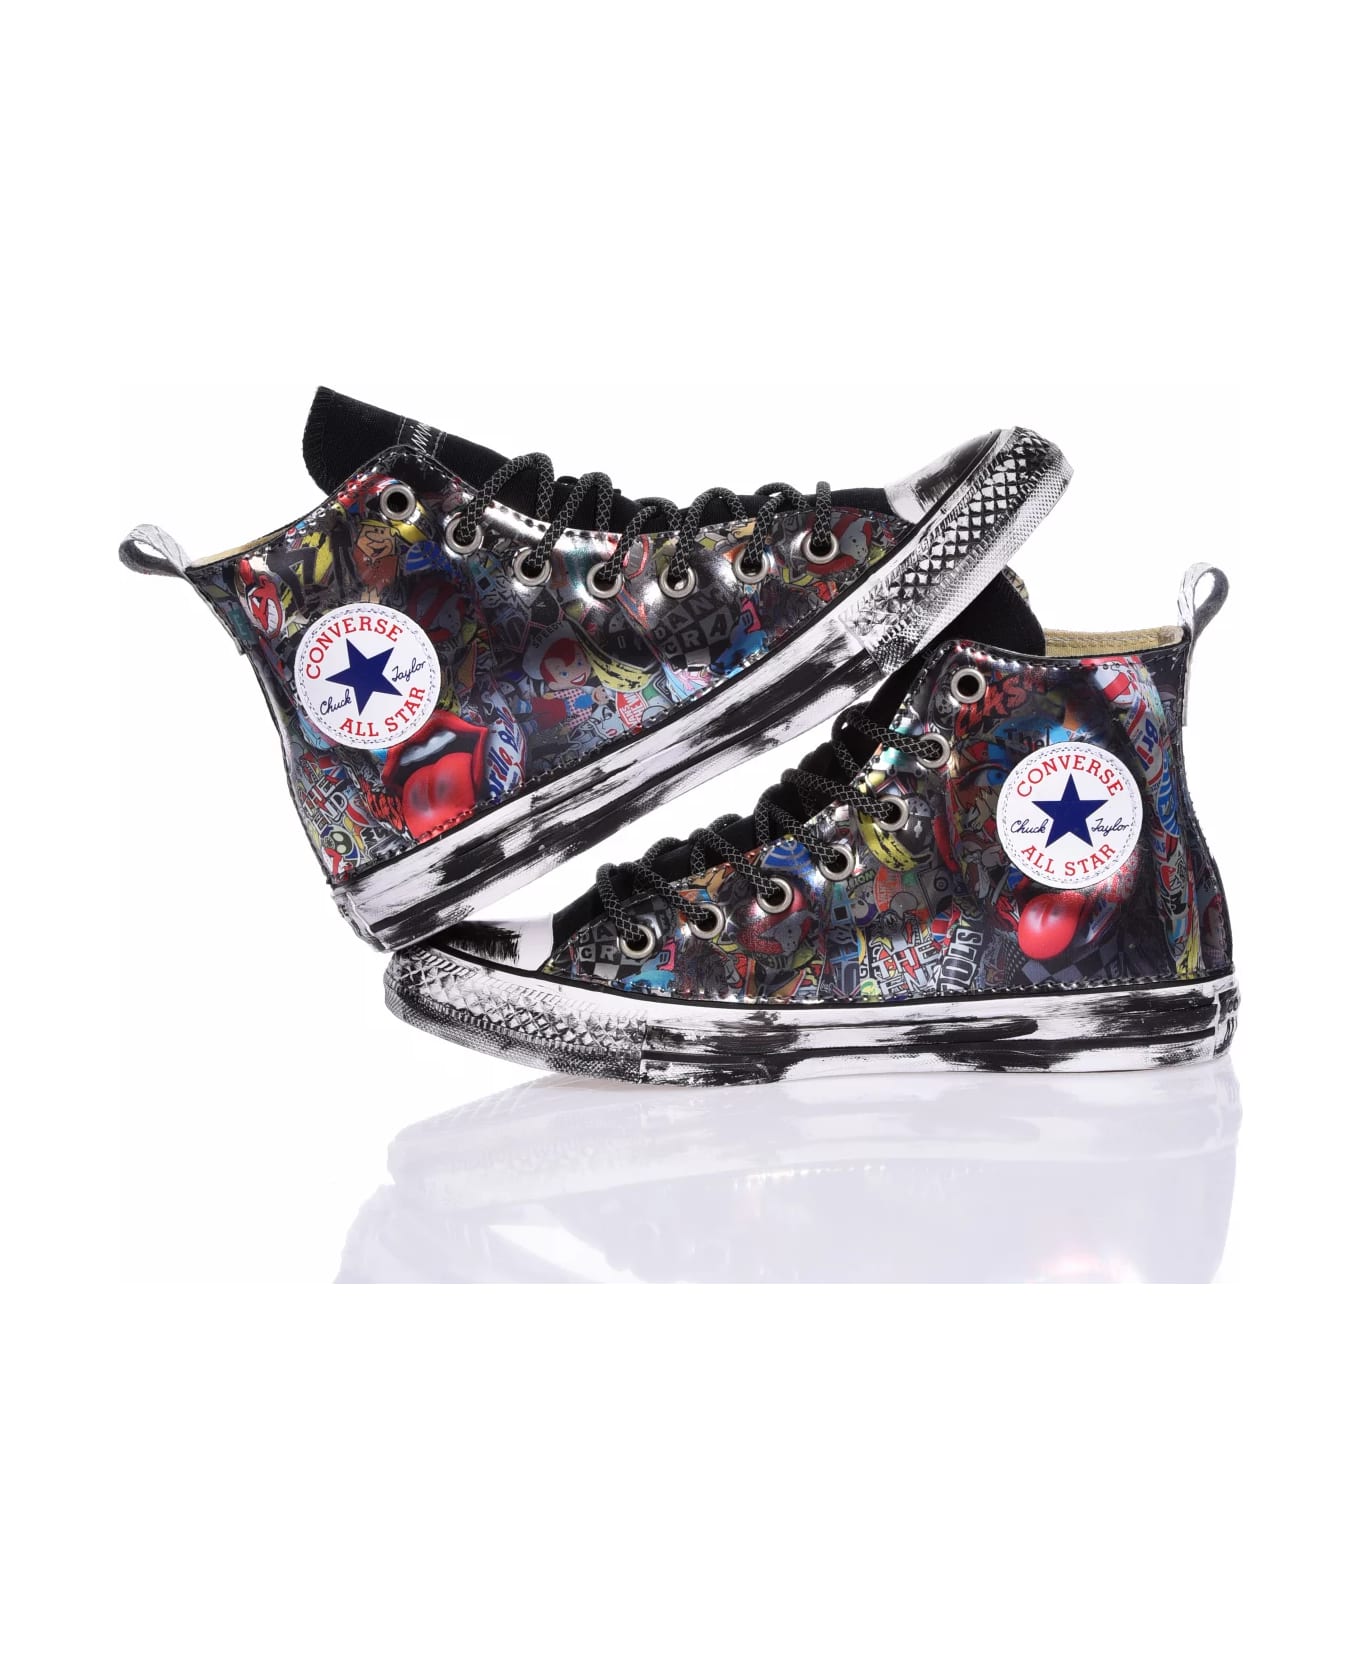 Mimanera Converse All Star Pop Stickers Mimanera Customized Sneakers スニーカー